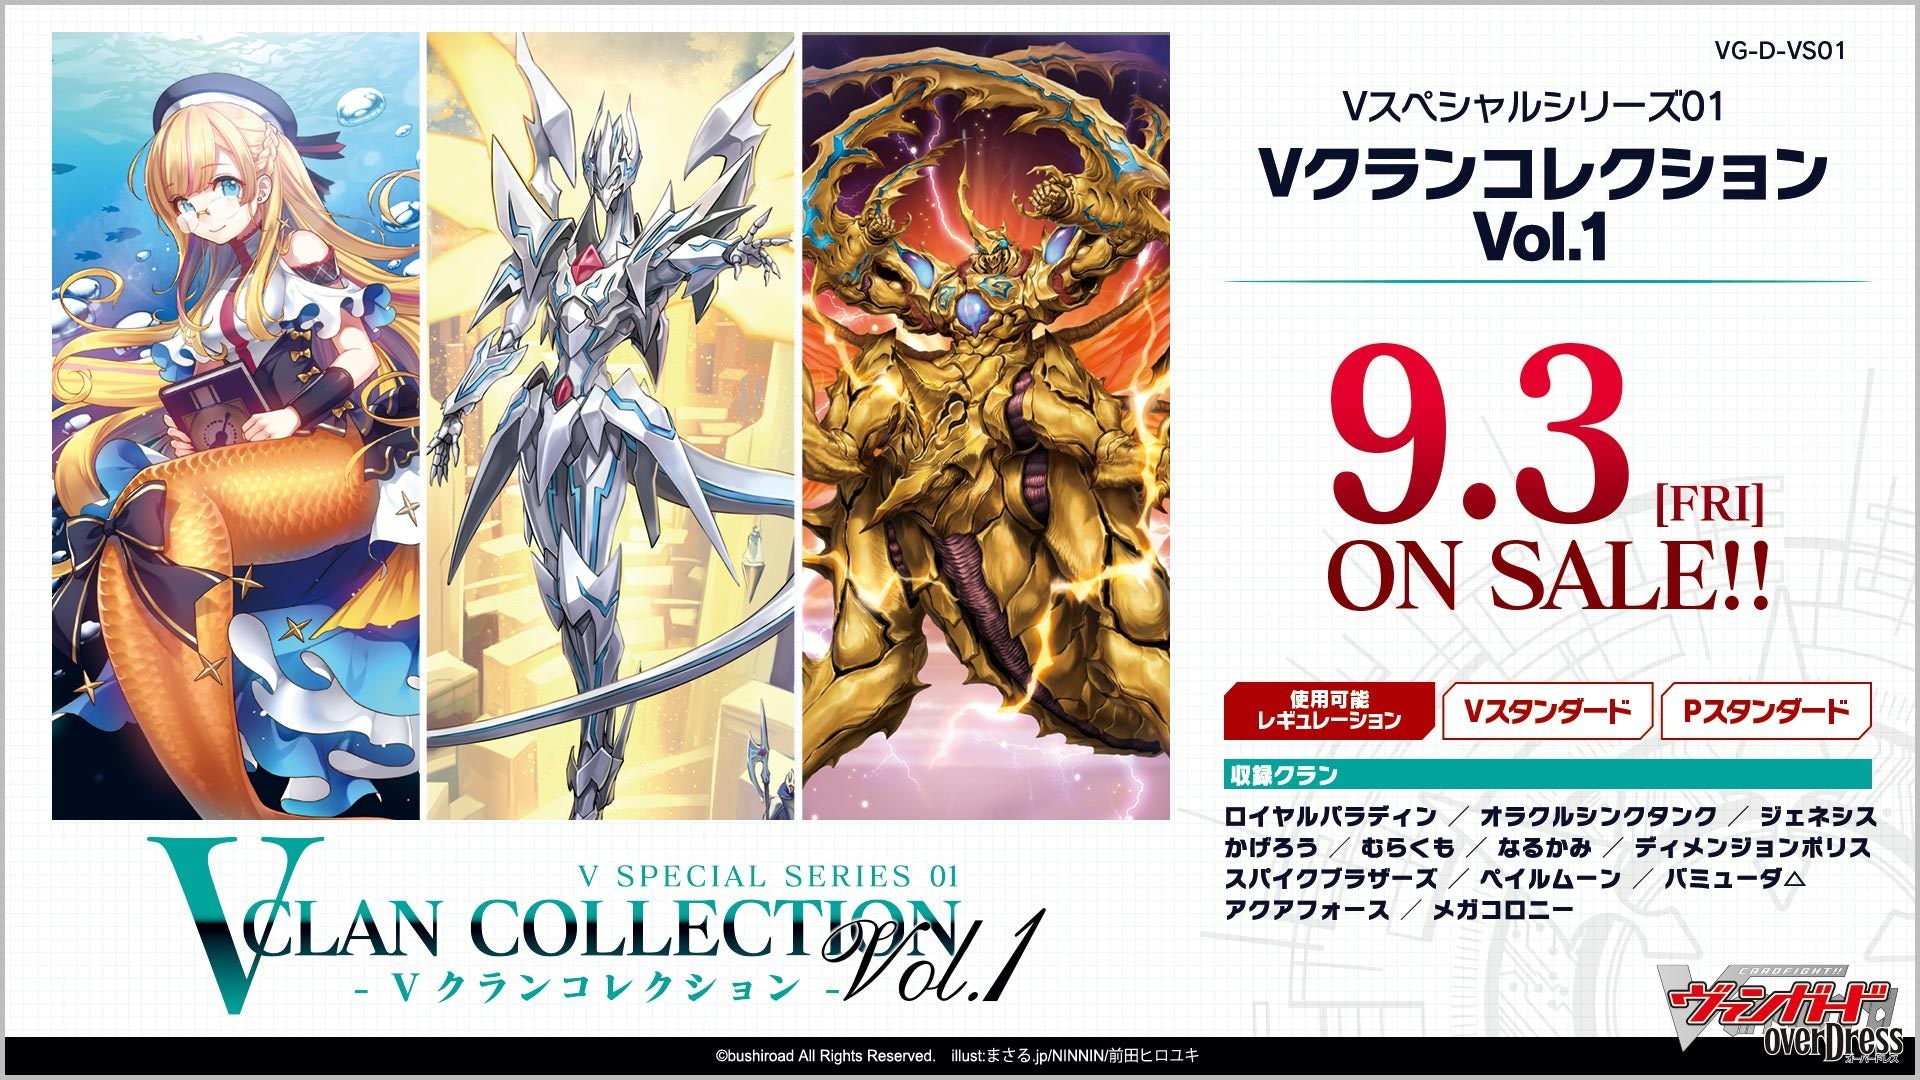 Cardfight Vanguard overDress V Special Series 1st "V Clan Collection Vol.1" [VG-D-VS01] (Japanese)-Booster Pack (Random)-Bushiroad-Ace Cards & Collectibles